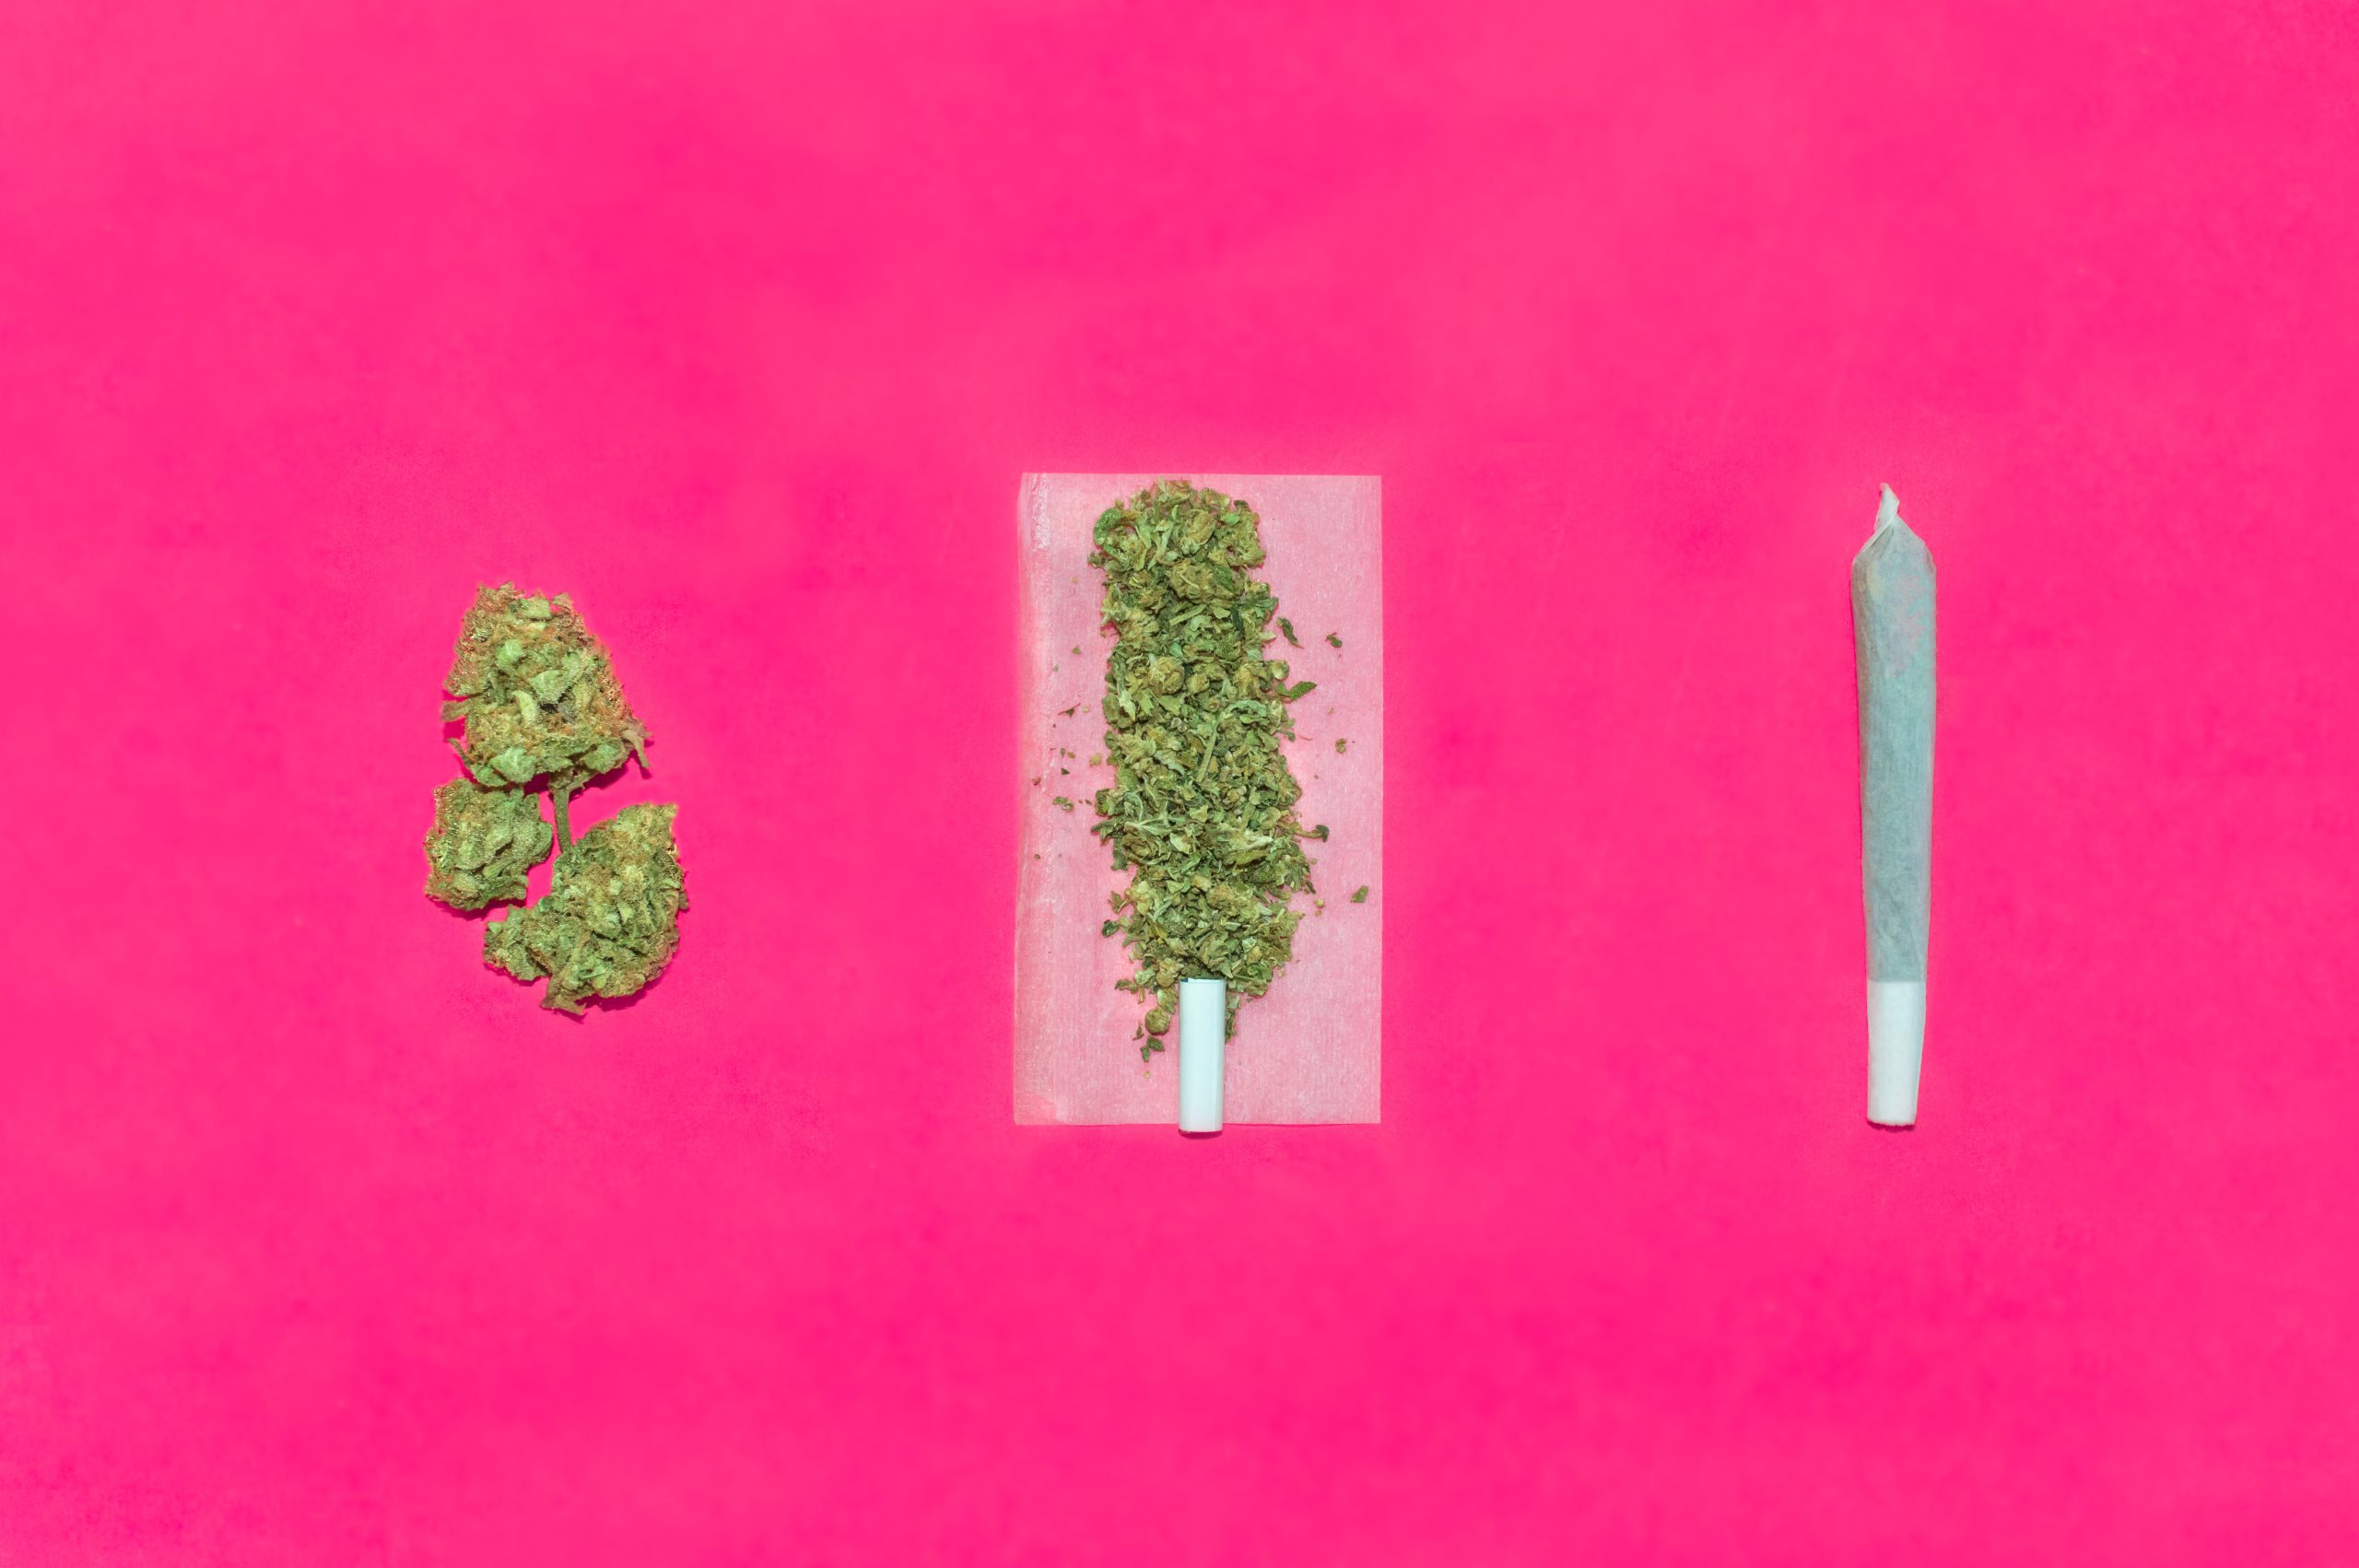 Process for rolling a cannabis joint. Top view of steps to roll a marijuana joint isolate on pink background.